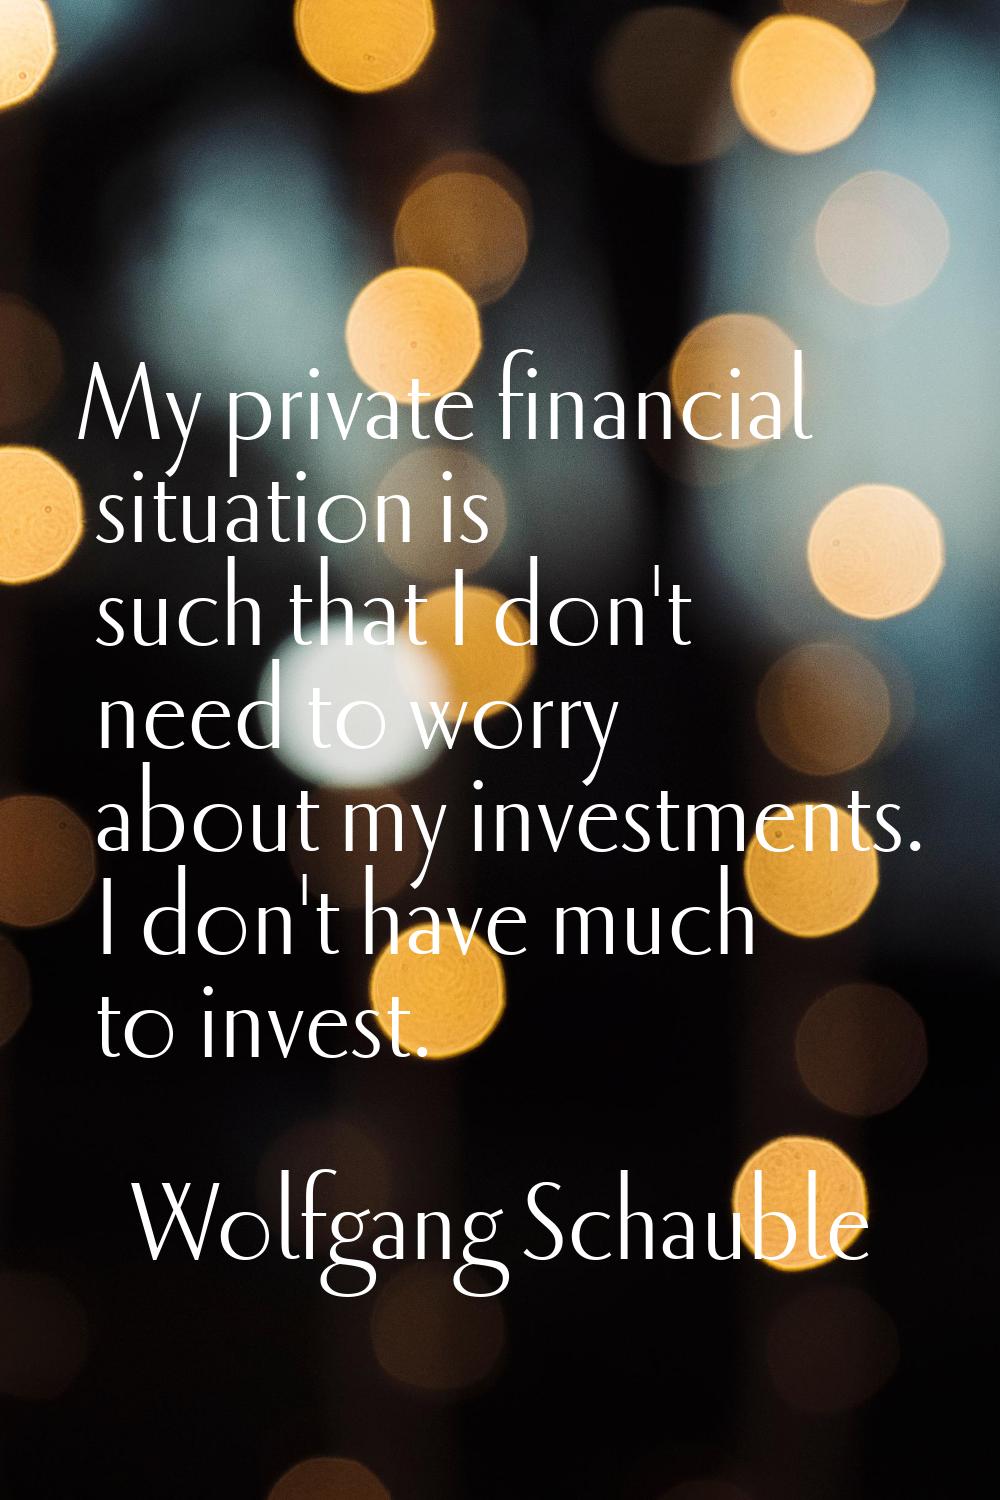 My private financial situation is such that I don't need to worry about my investments. I don't hav